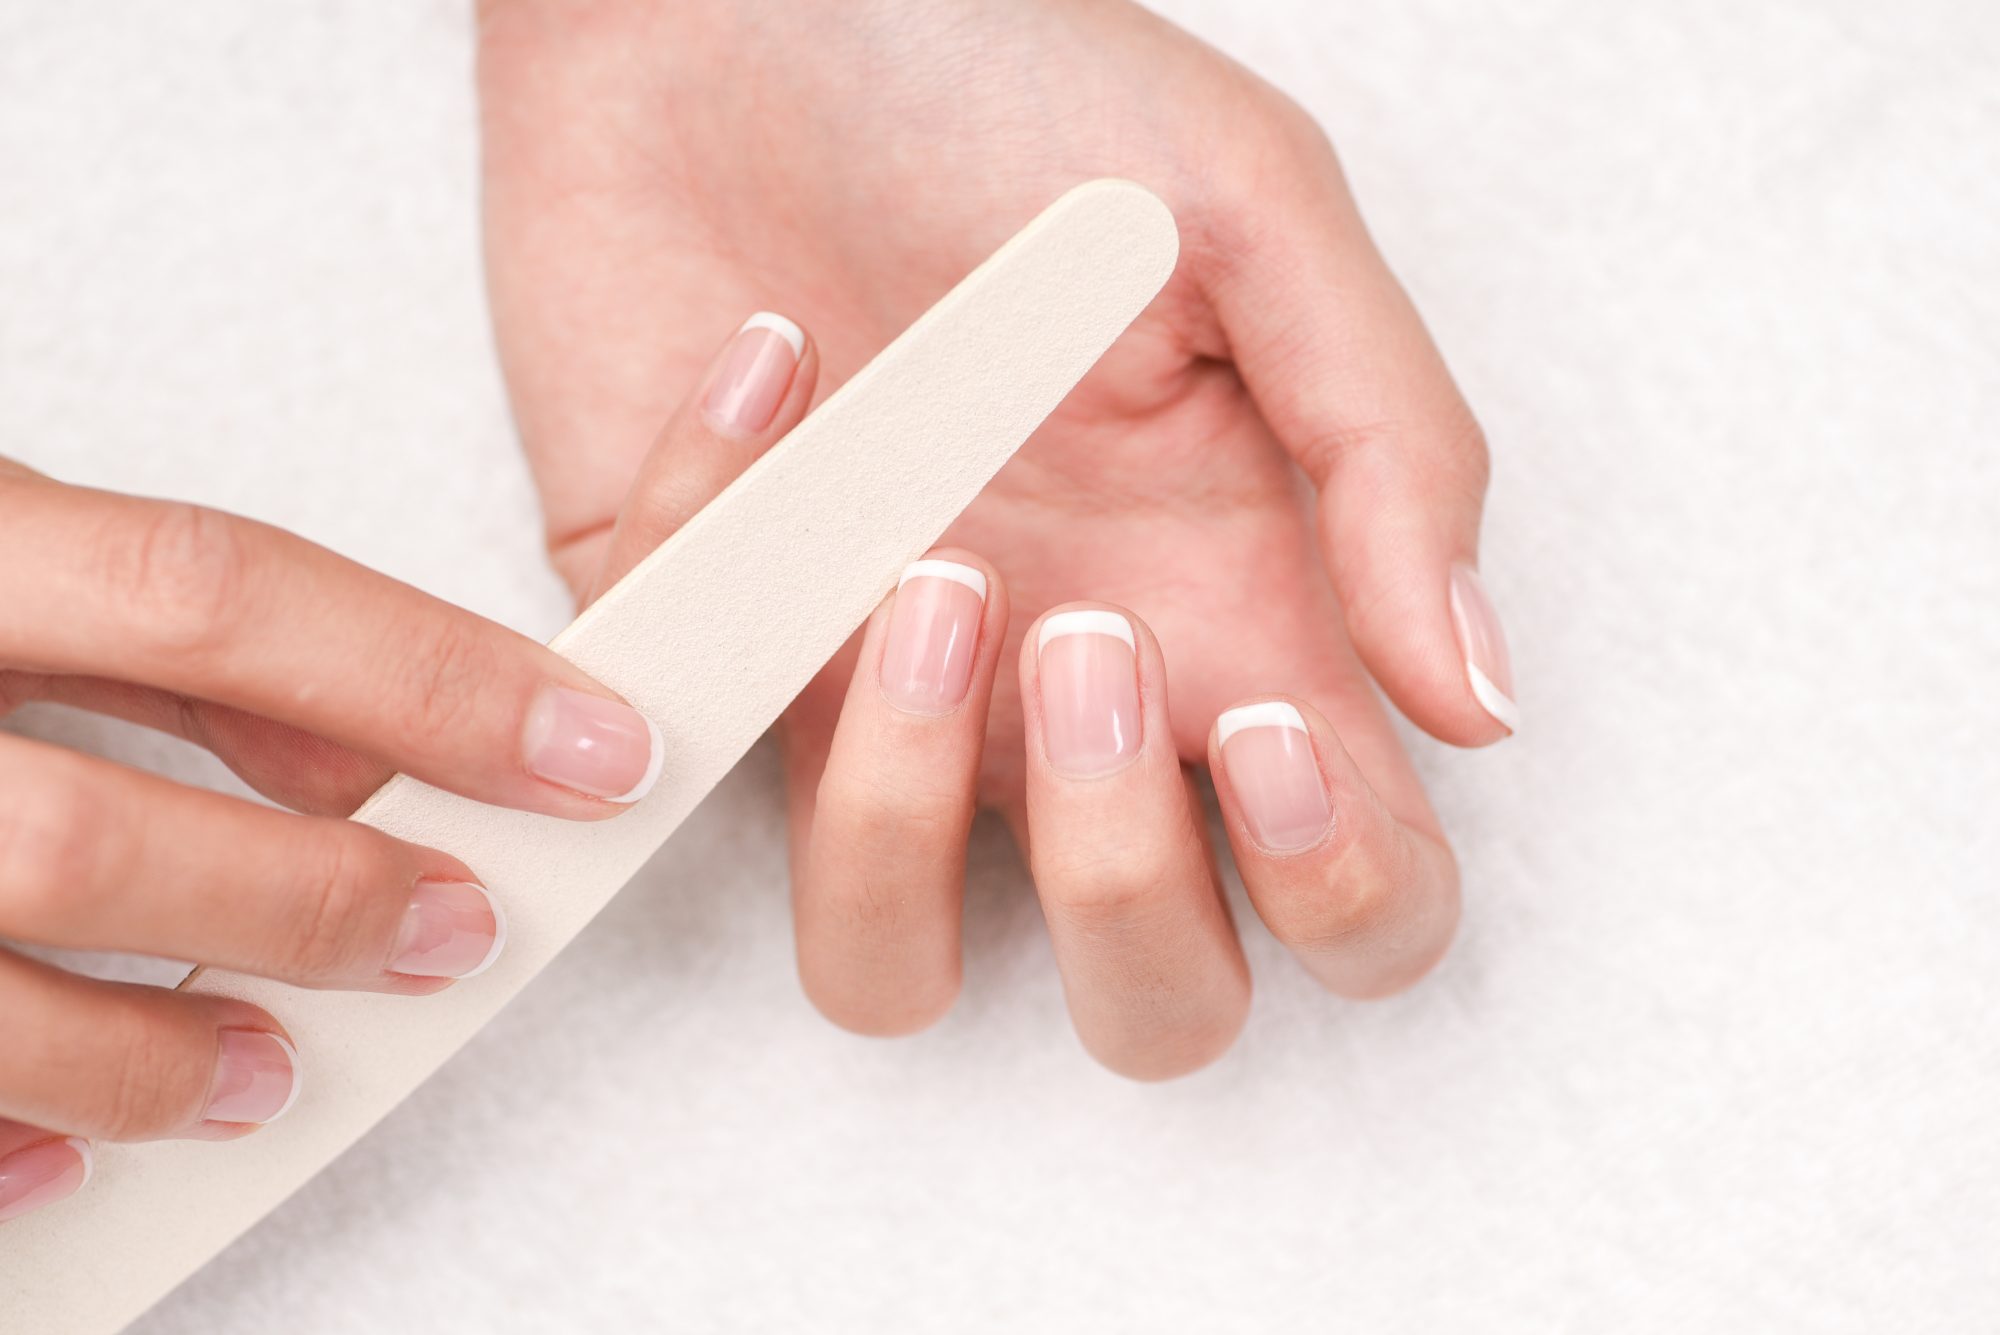 How to Fix a Broken Nail, According to ManicuristsHelloGiggles